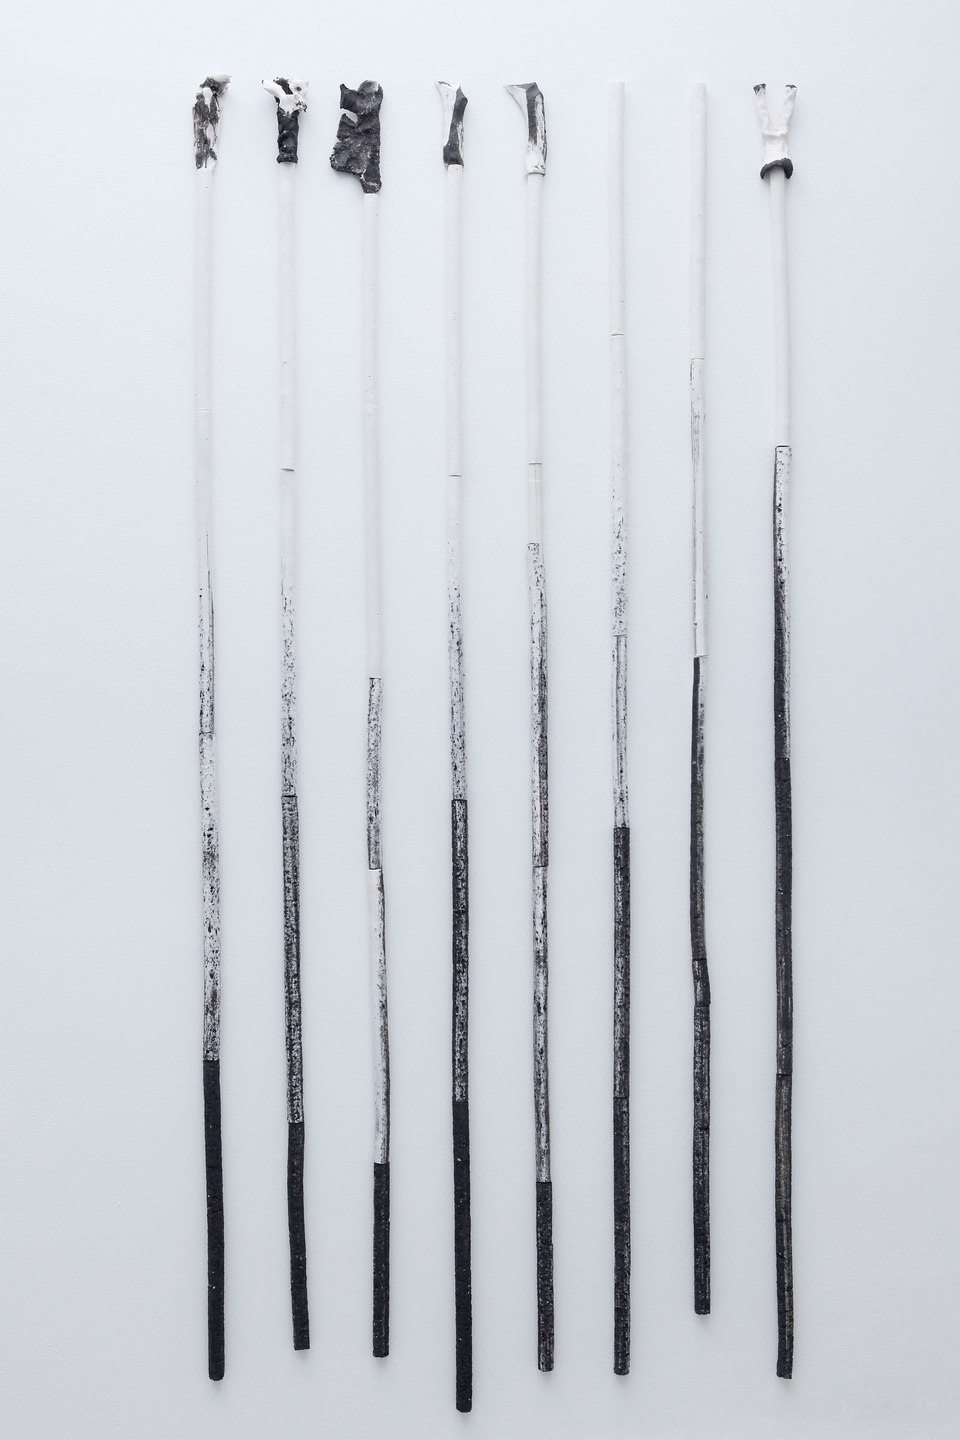 Peles Empire, Formation, 'formation 10', 2013, unglazed porcelain with black grog, h. 220 x w. 100 cm, Cell Project Space